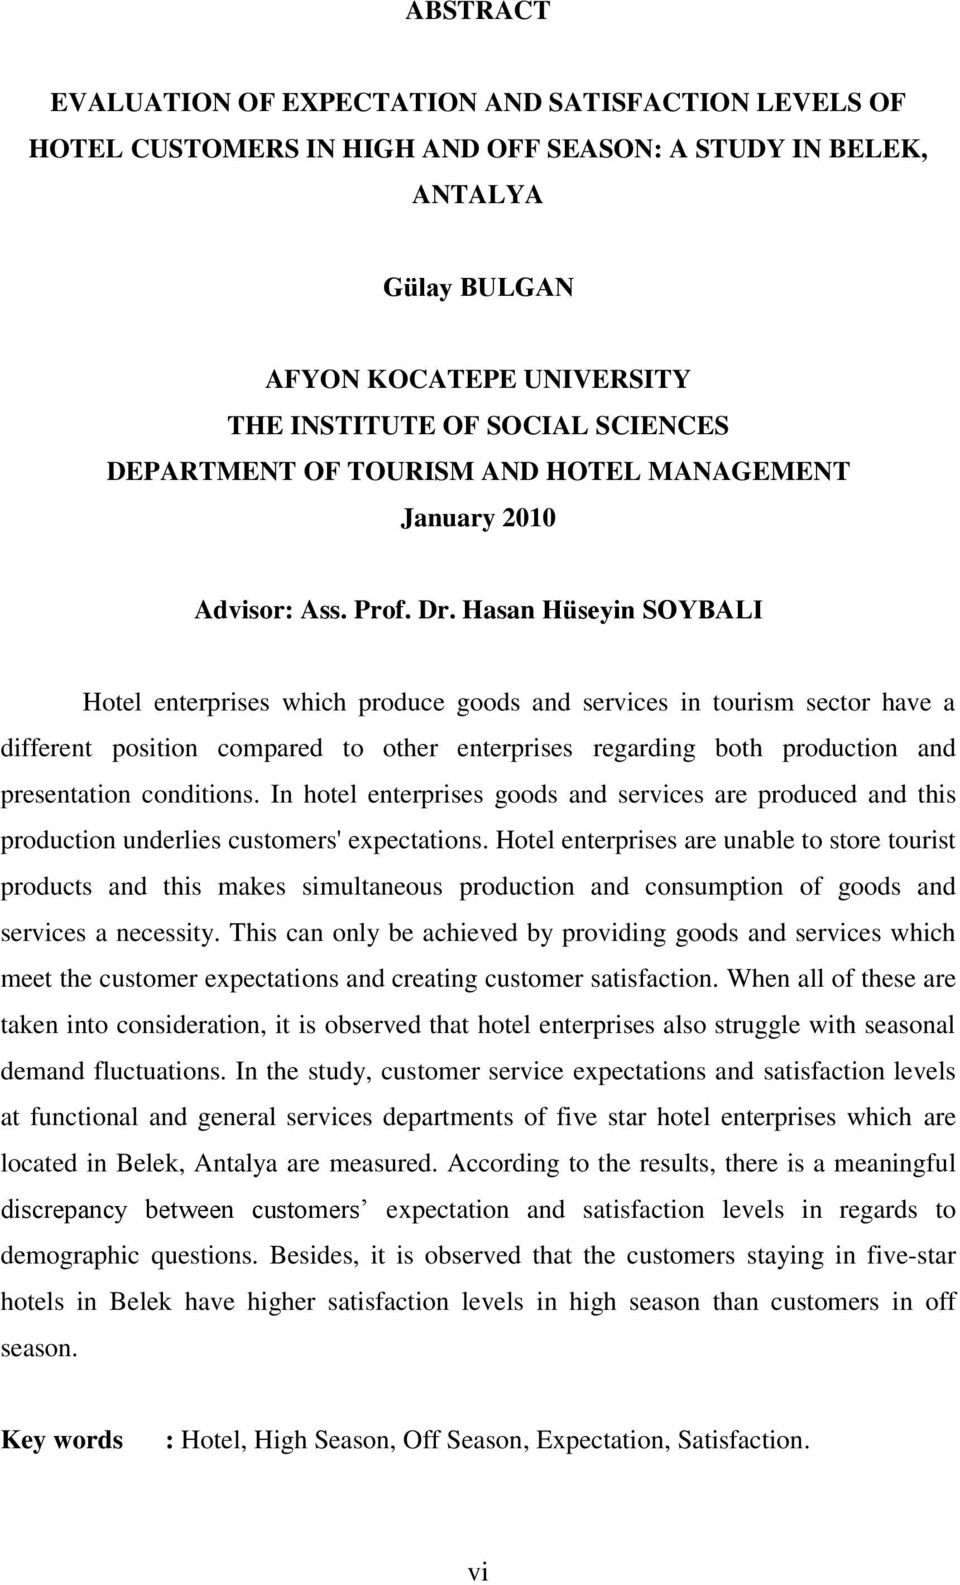 Hasan Hüseyin SOYBALI Hotel enterprises which produce goods and services in tourism sector have a different position compared to other enterprises regarding both production and presentation